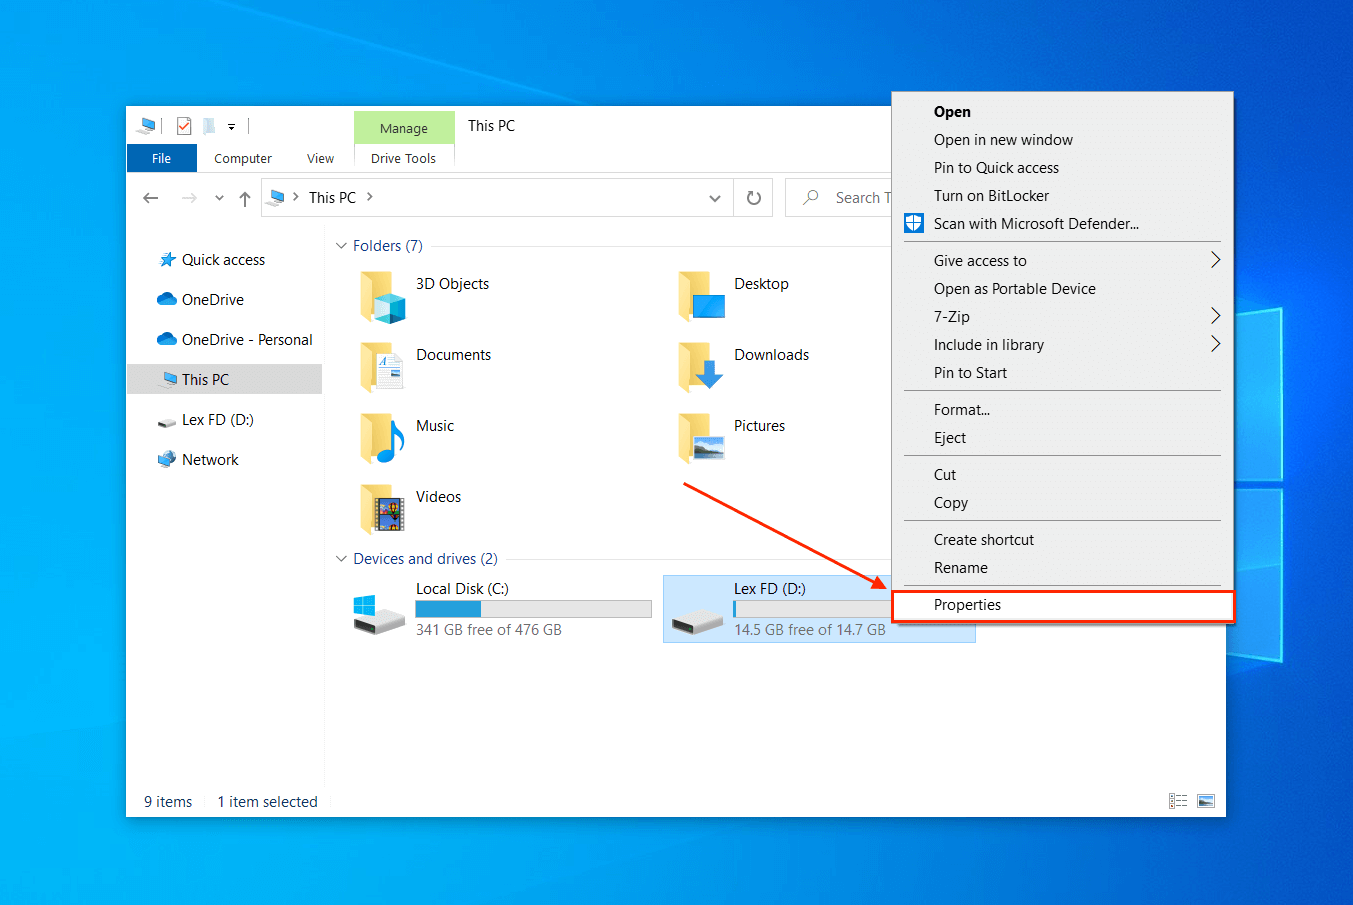 Properties button within the USB right-click menu